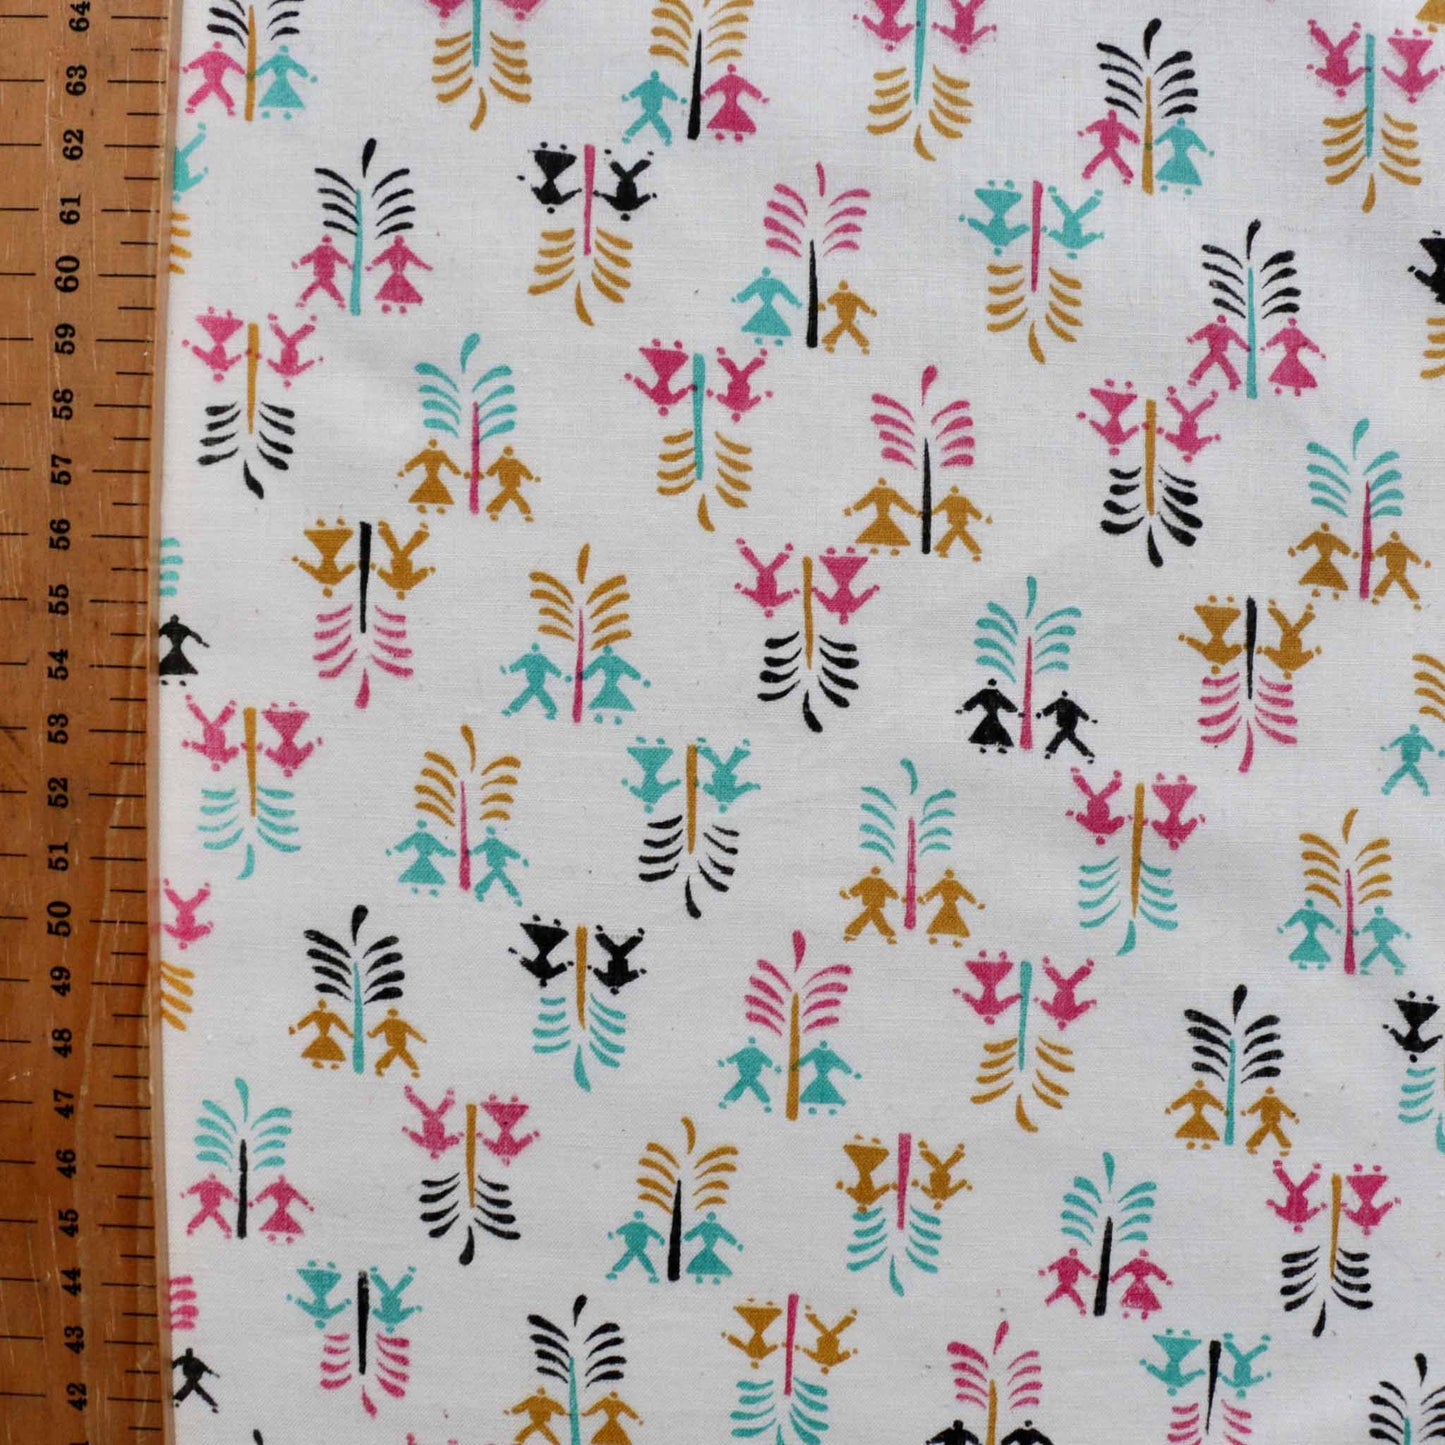 metre sustainable vintage deadstock dressmaking fabric with colourful printed boy girl design